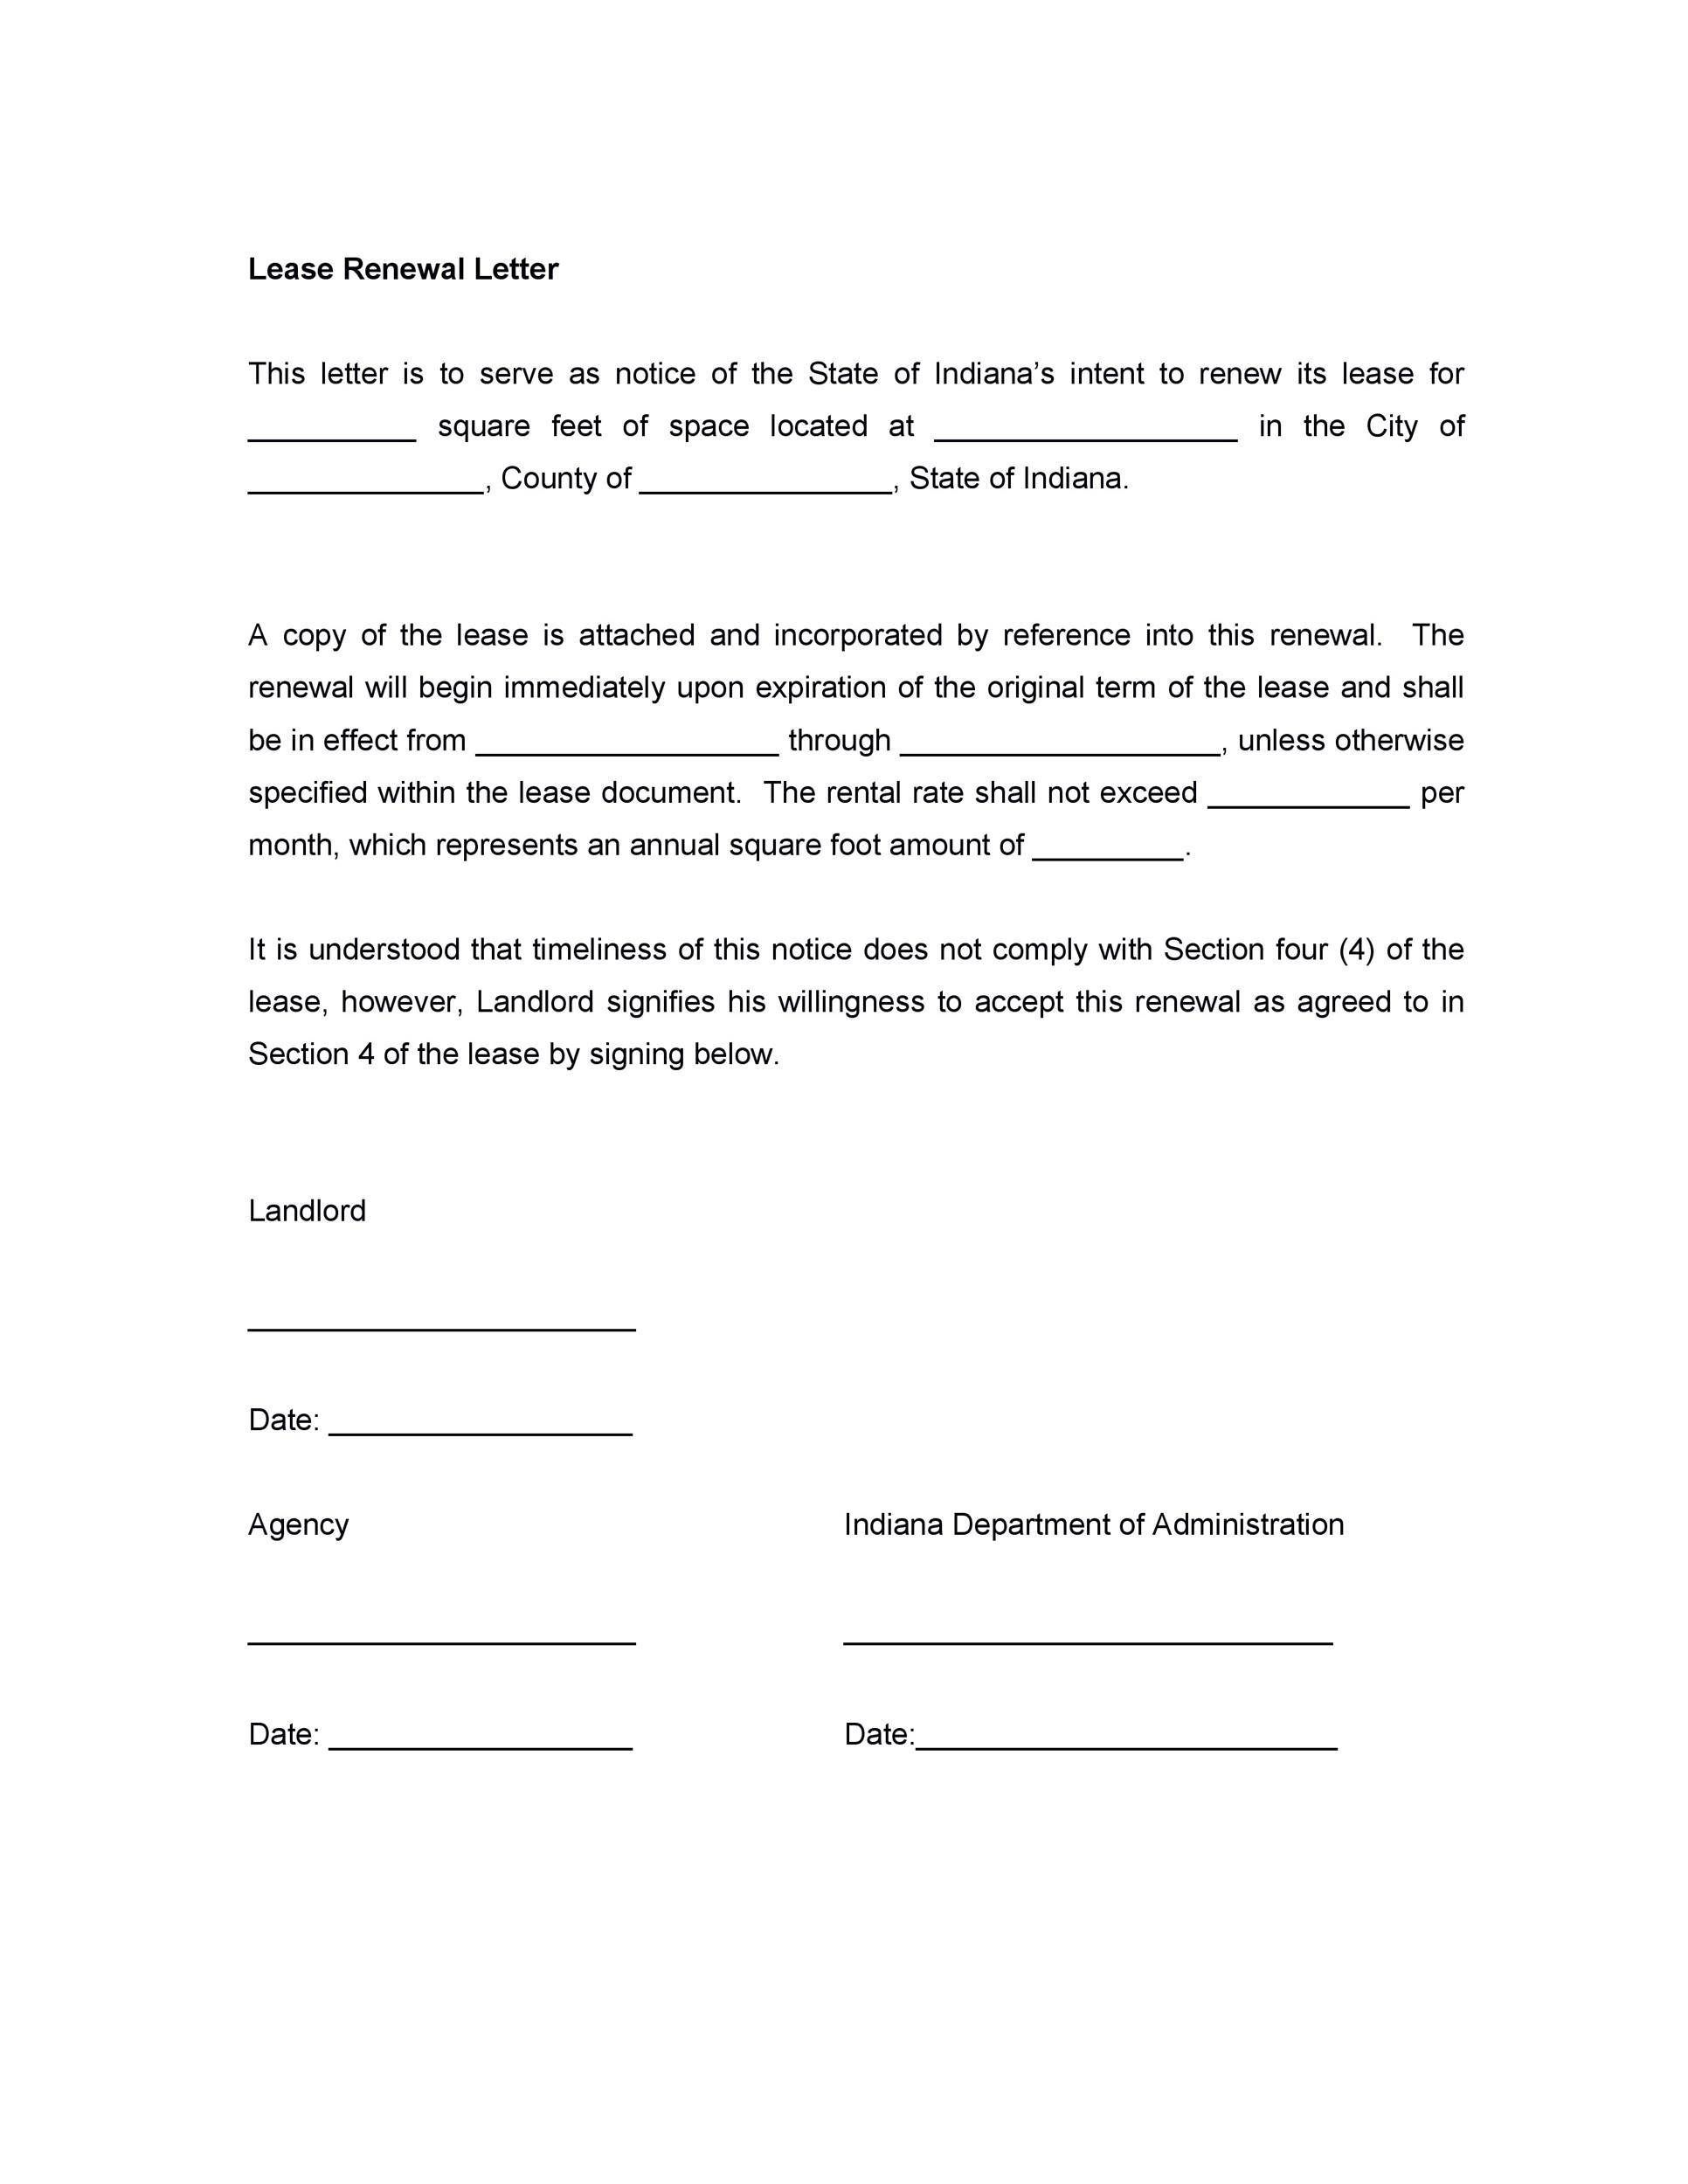 Free Sample Letter Of Intent To Sell Property from templatelab.com